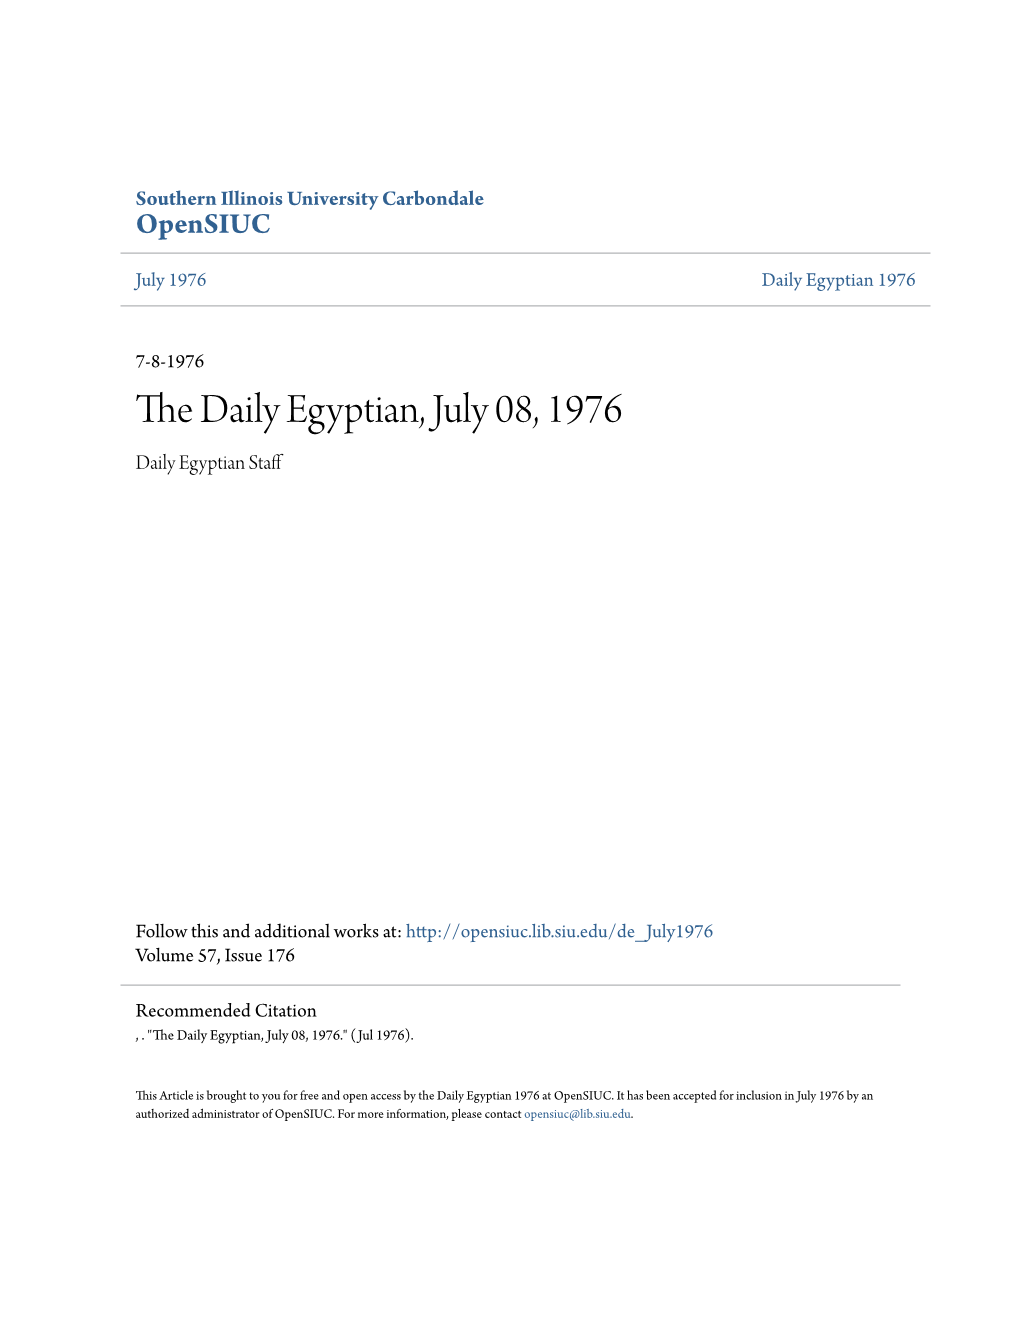 The Daily Egyptian, July 08, 1976